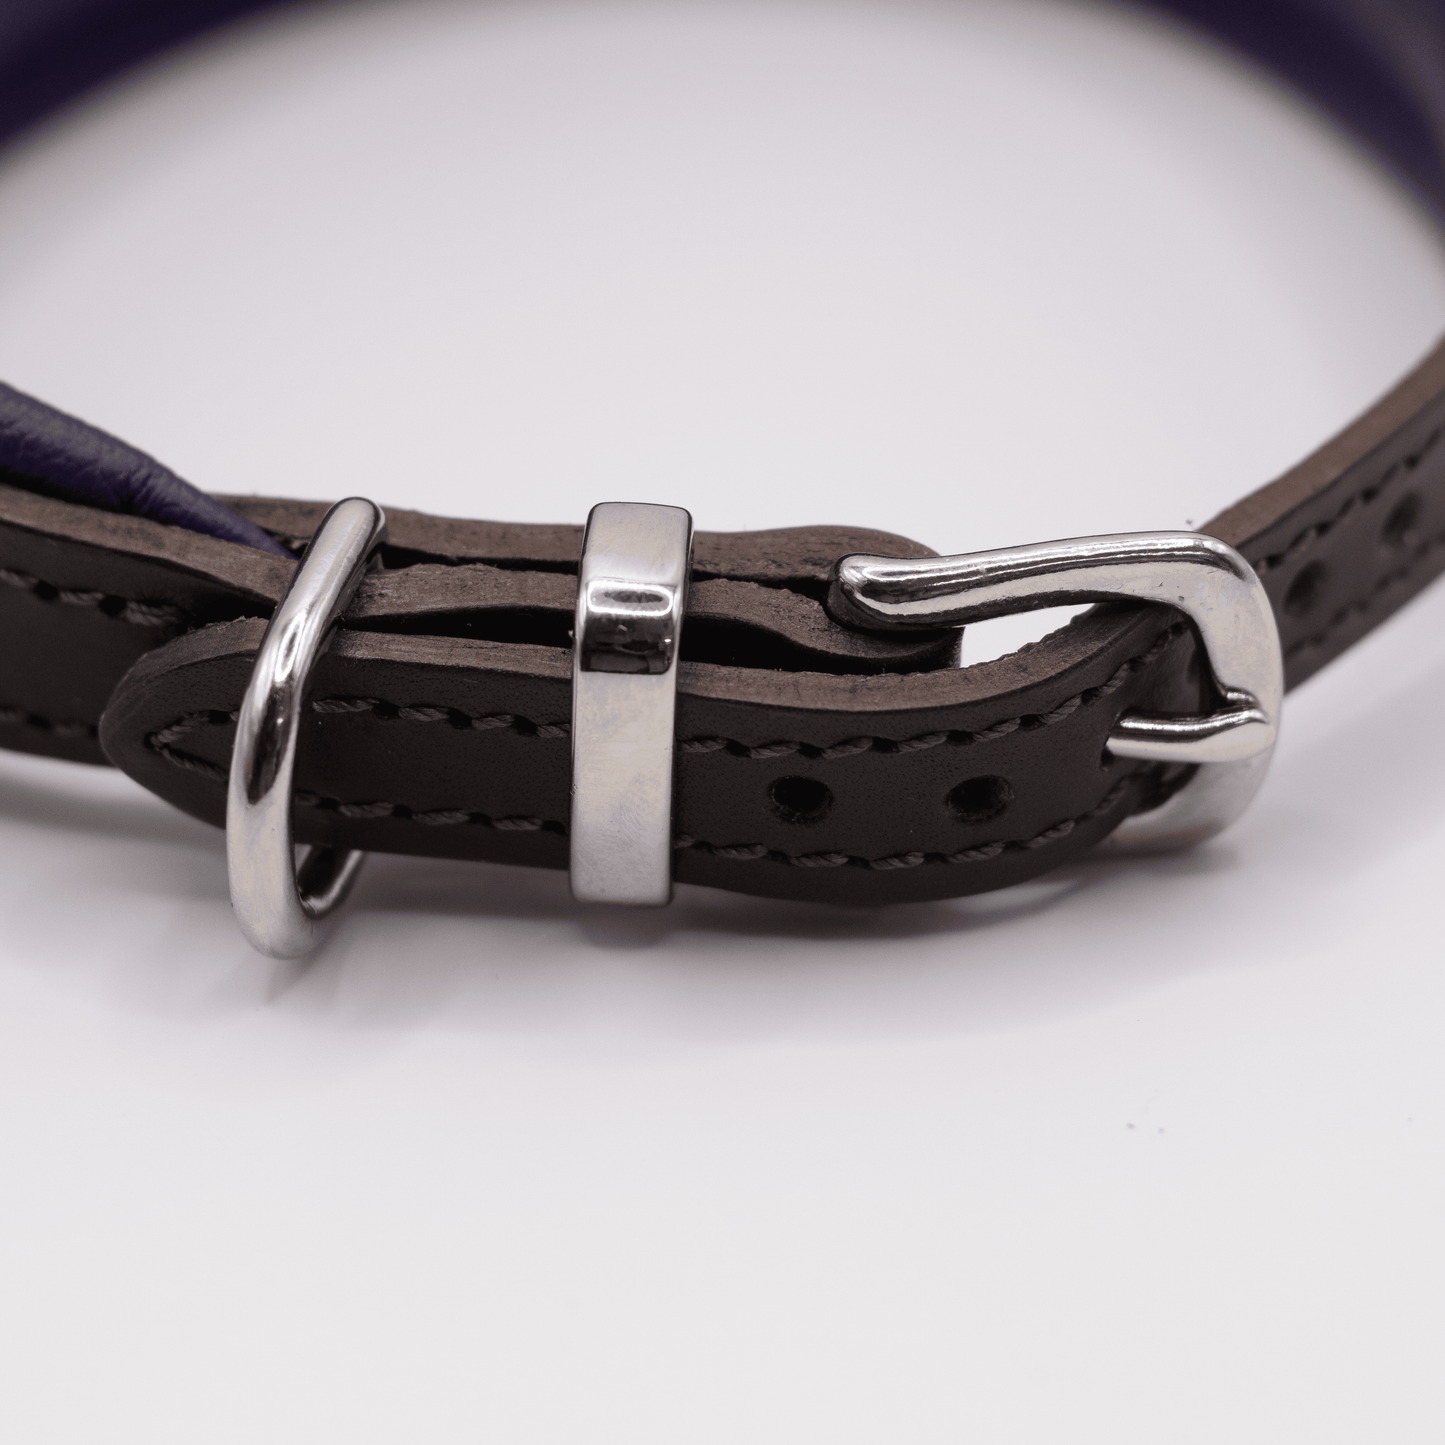 D&H Padded Leather Hound Collar Brown and Purple